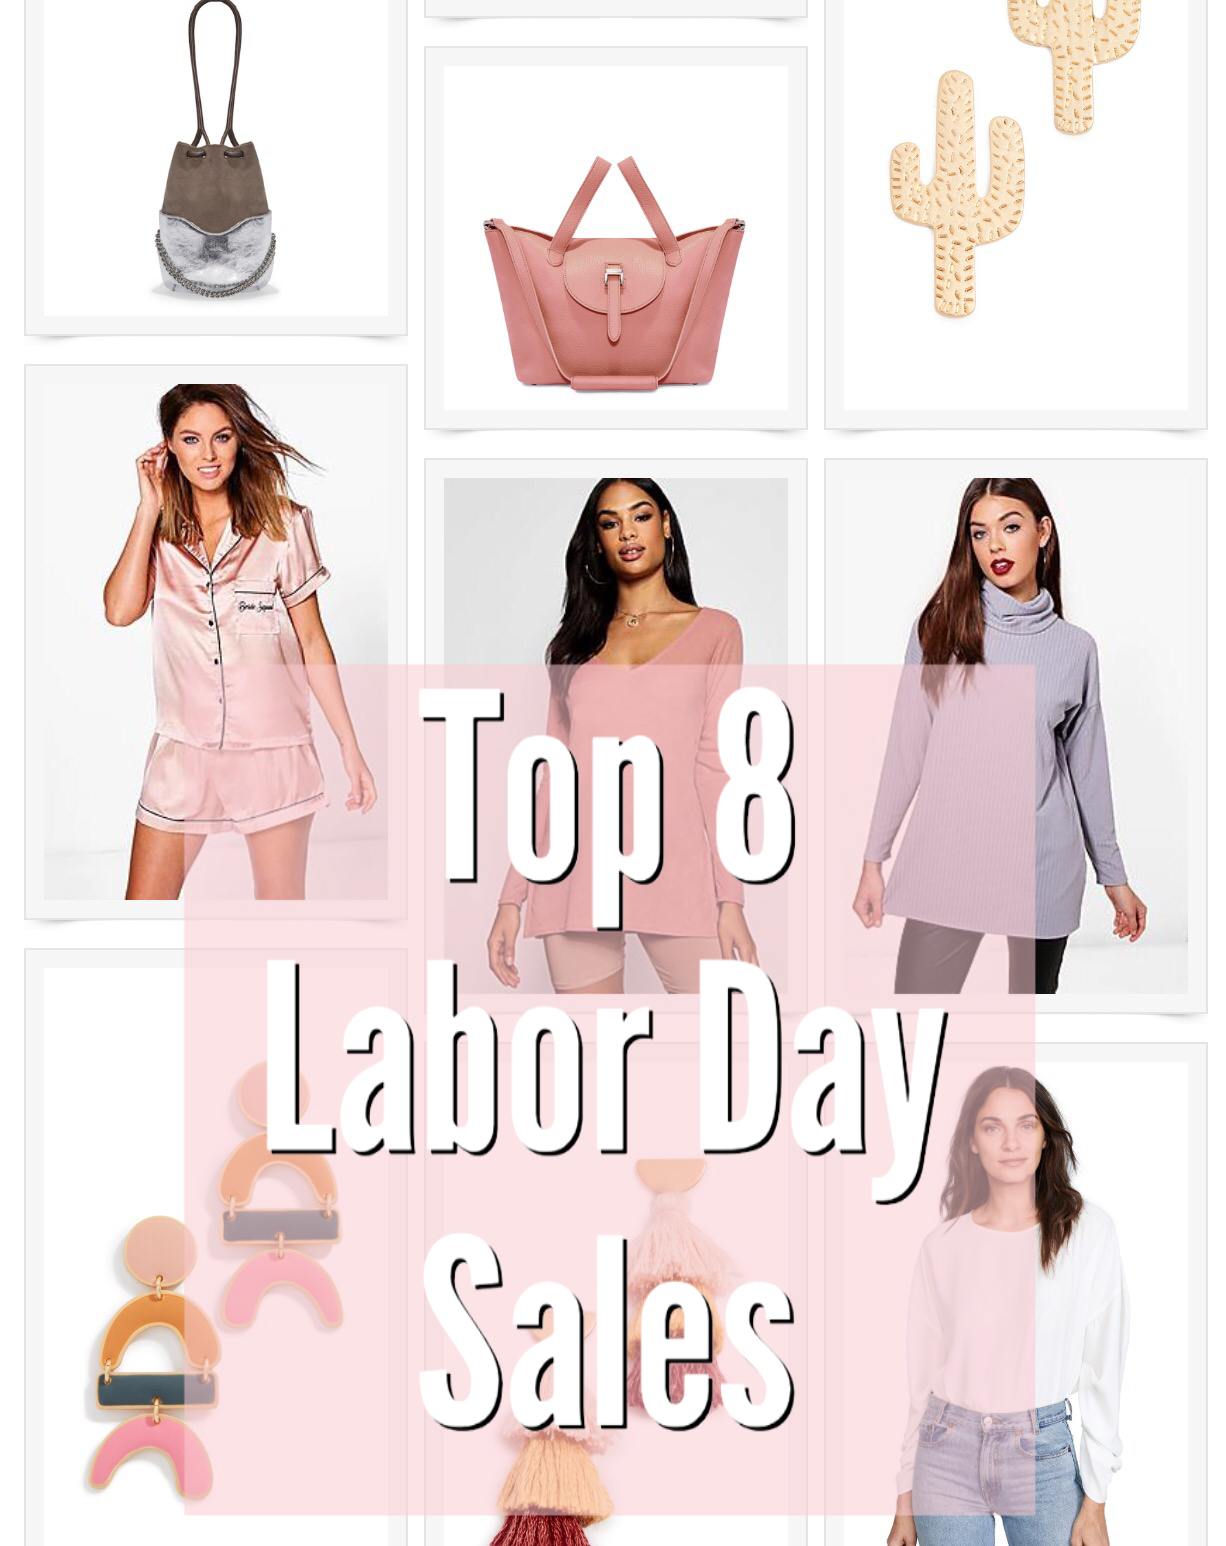 Top Labor Day Sales for fashion by North Carolina fashion and lifestyle blogger Jessica Linn from Linn Style